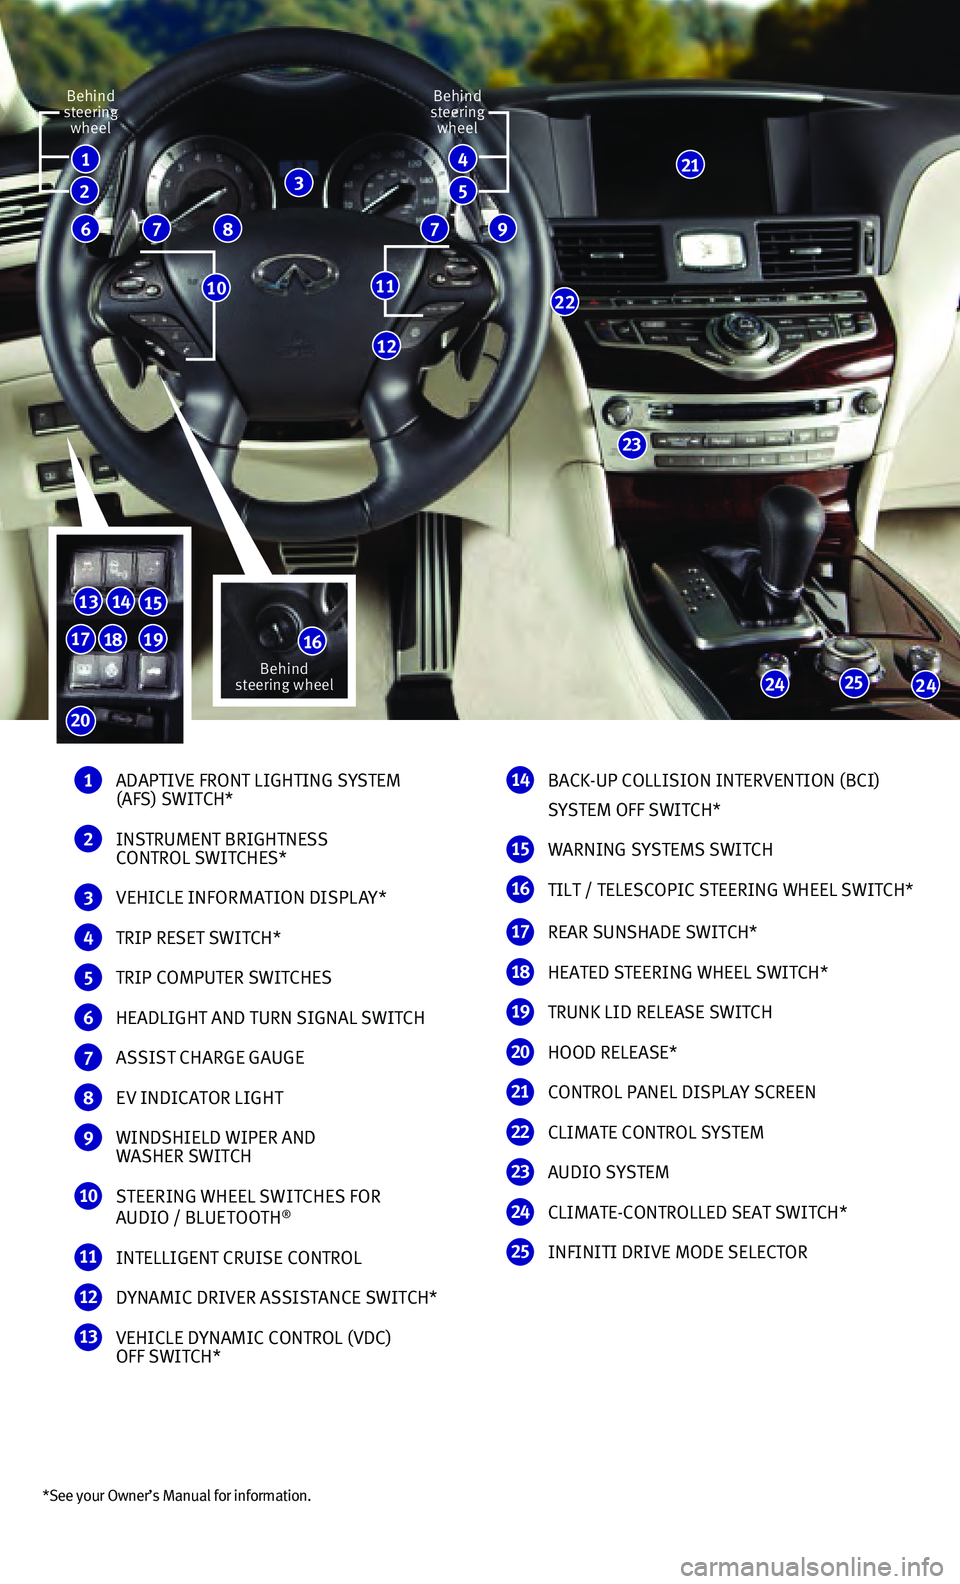 INFINITI Q70 HYBRID 2015  Quick Reference Guide *See your Owner’s Manual for information.
1  ADAPTIVE FRONT LIGHTING SYSTEM  
(AFS) SWITCH*
2  INSTRUMENT BRIGHTNESS  
CONTROL SWITCHES*
3 VEHICLE INFORM AT ION DISPL AY*
4 TRIP RESET SWITCH*
5 TRIP